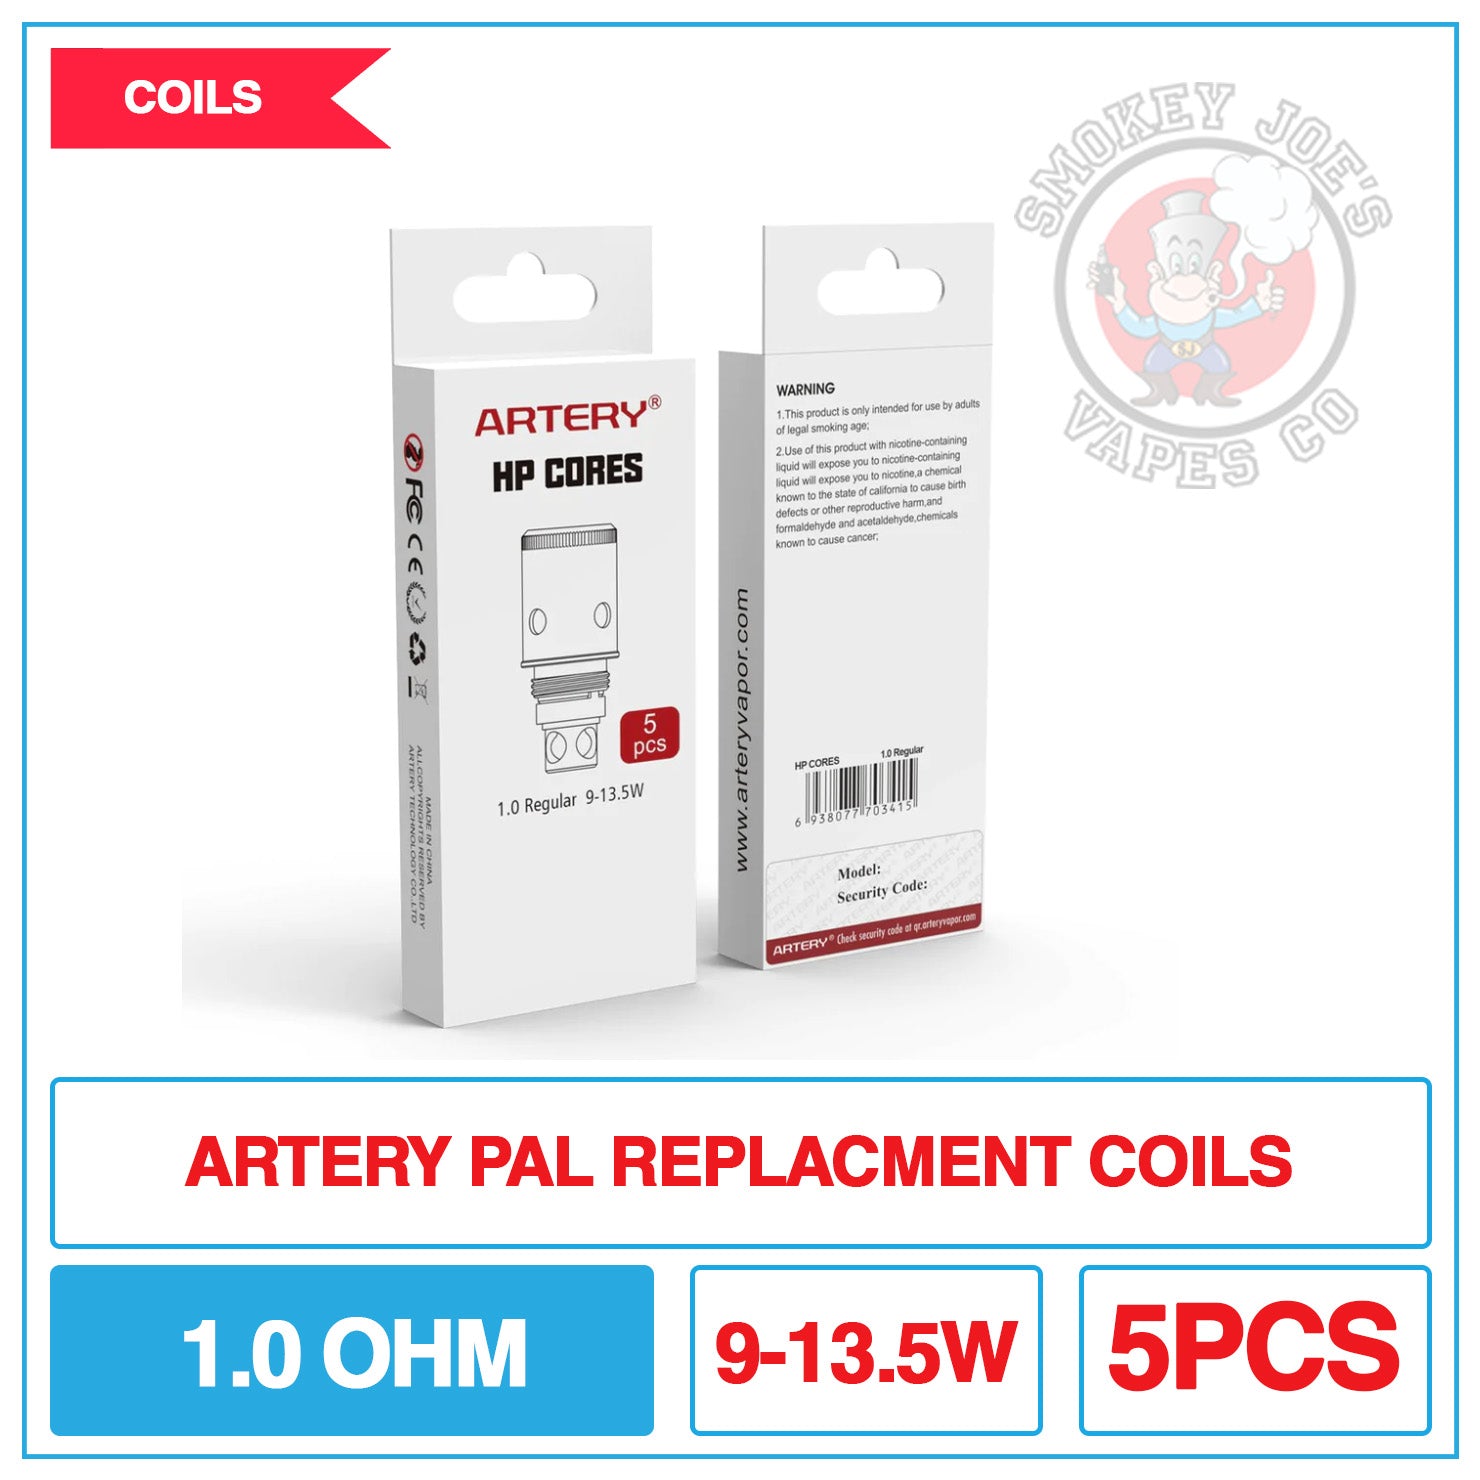 Artery Pal Replacement Coils | Smokey Joes Vapes Co